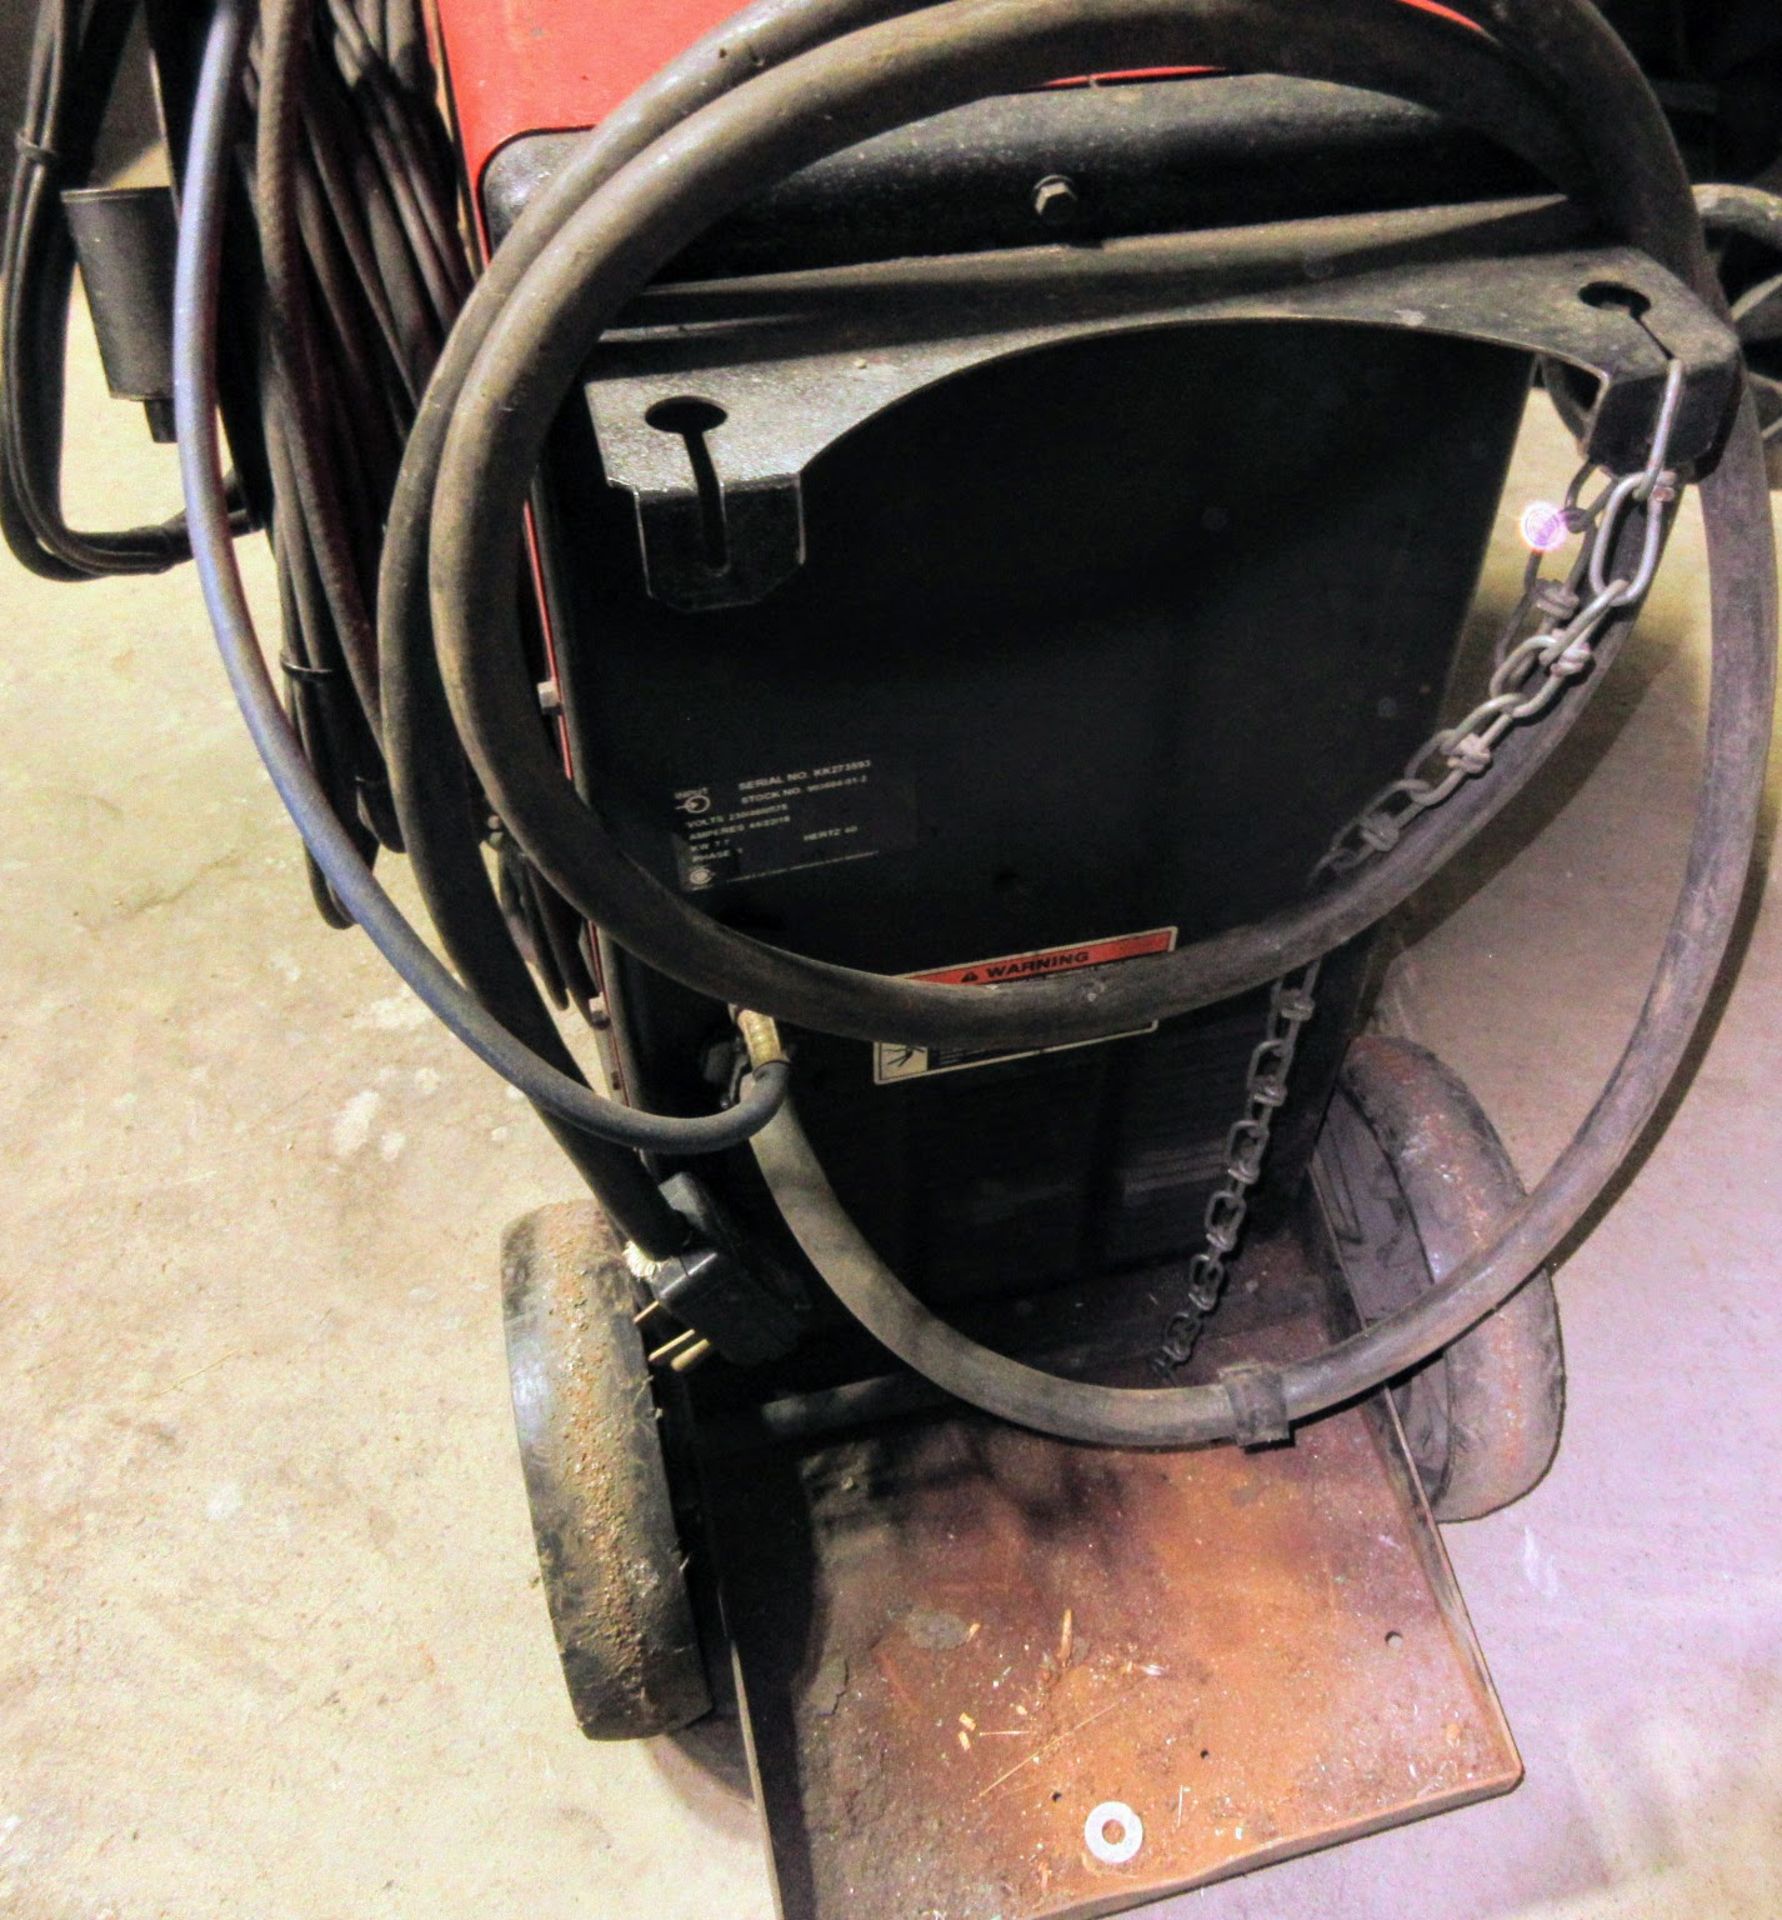 BOC MIGMATIC 250X WELDER W/ MILLER SPOOLMATIC 30A AIR COOLED SPOOL GUN, MIG TORCH, CABLES AND CART - Image 4 of 5